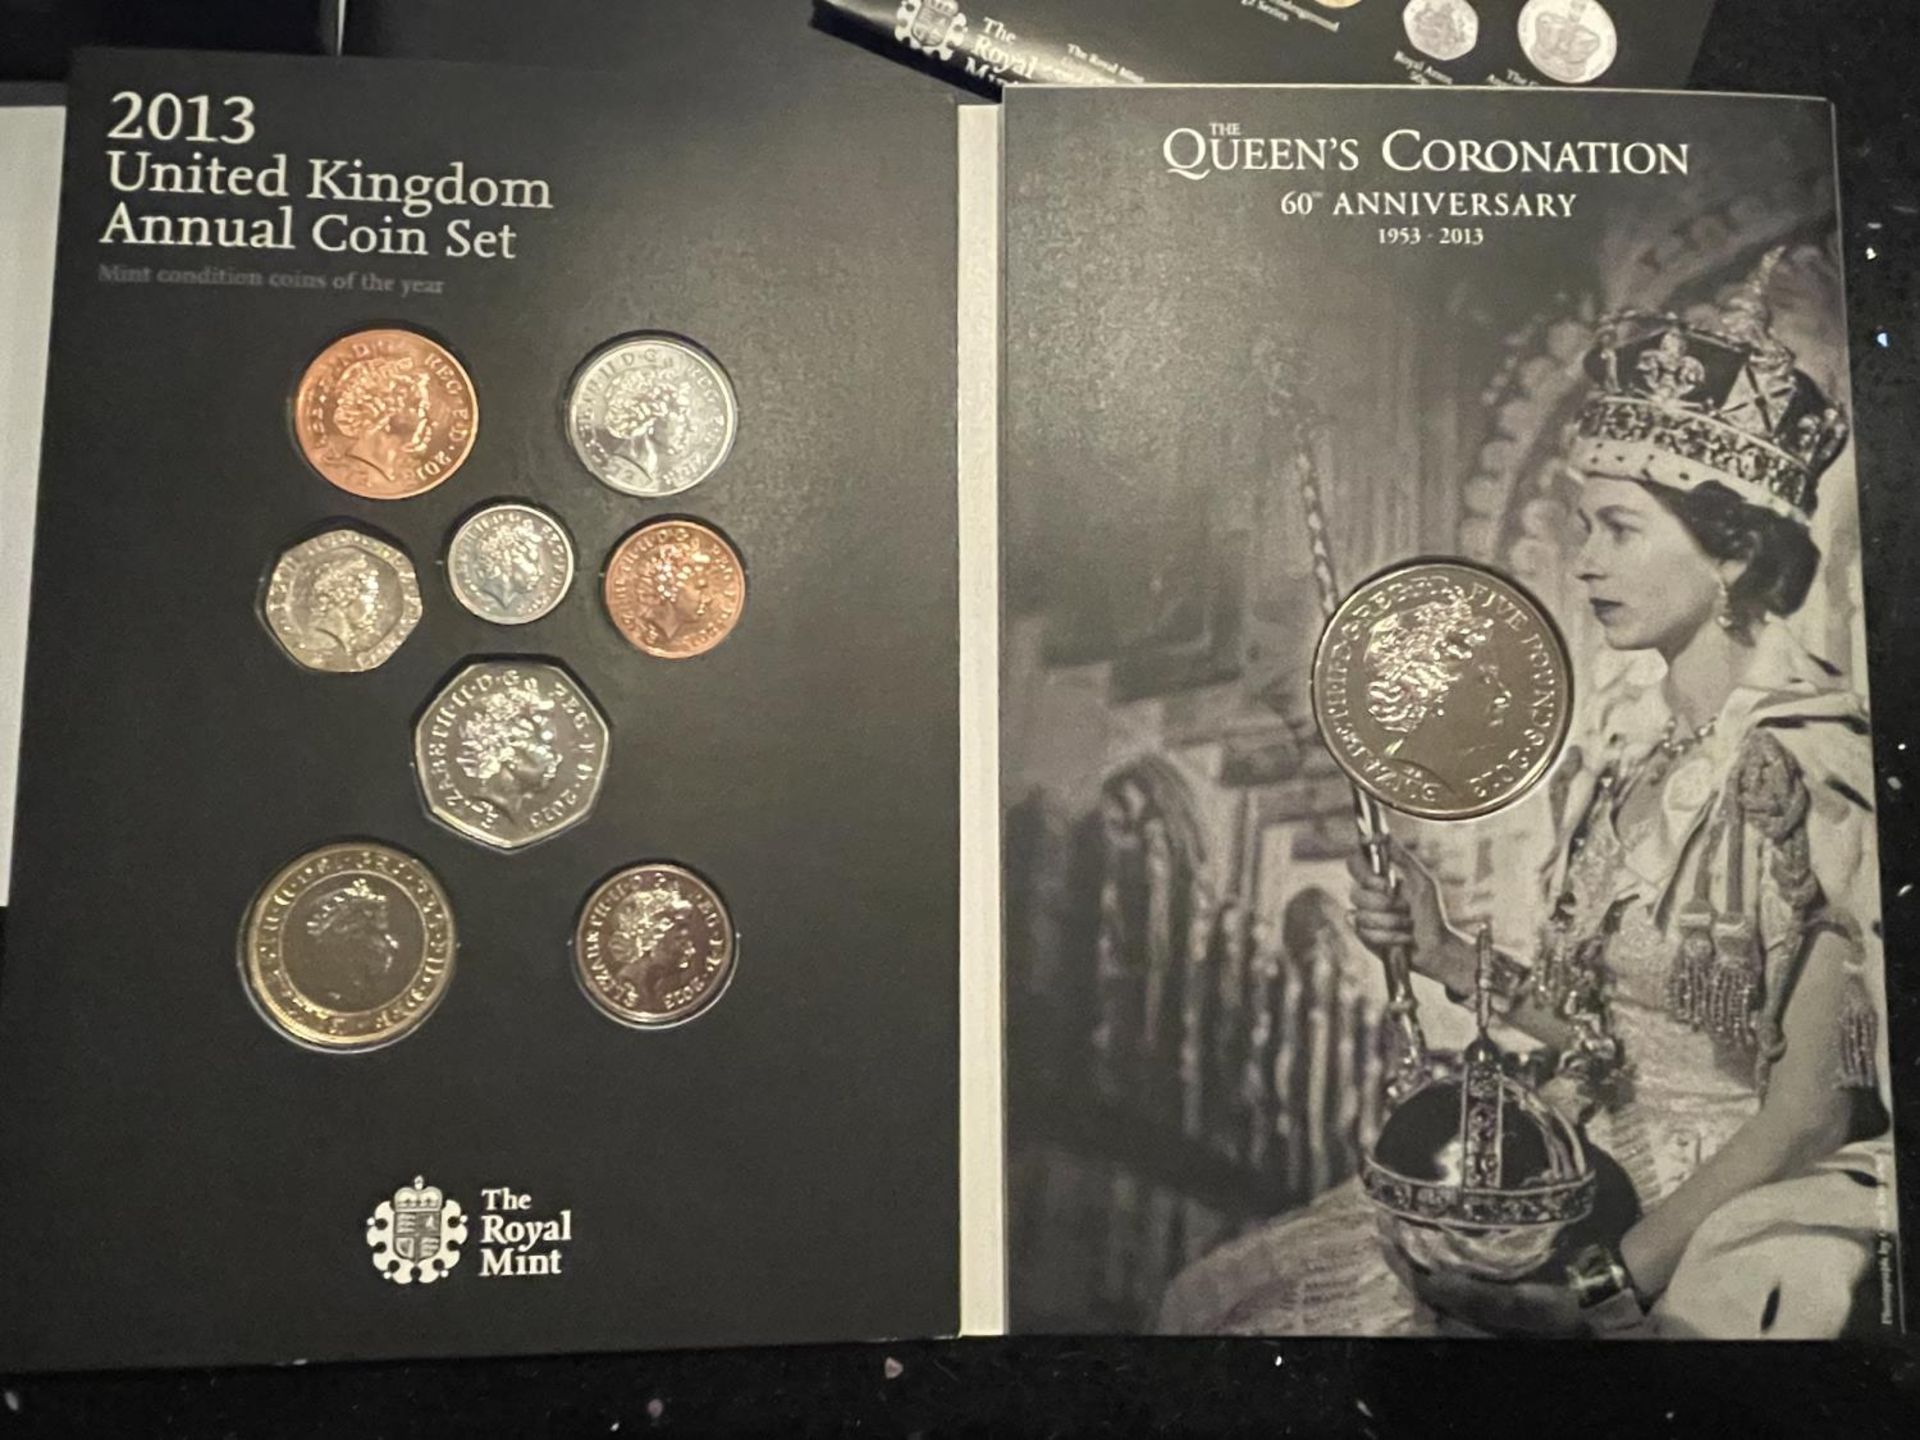 UK , ROYAL MINT , 2013 , ANNUAL COIN SET OF 15 . PRISTINE CONDITION - Image 4 of 5